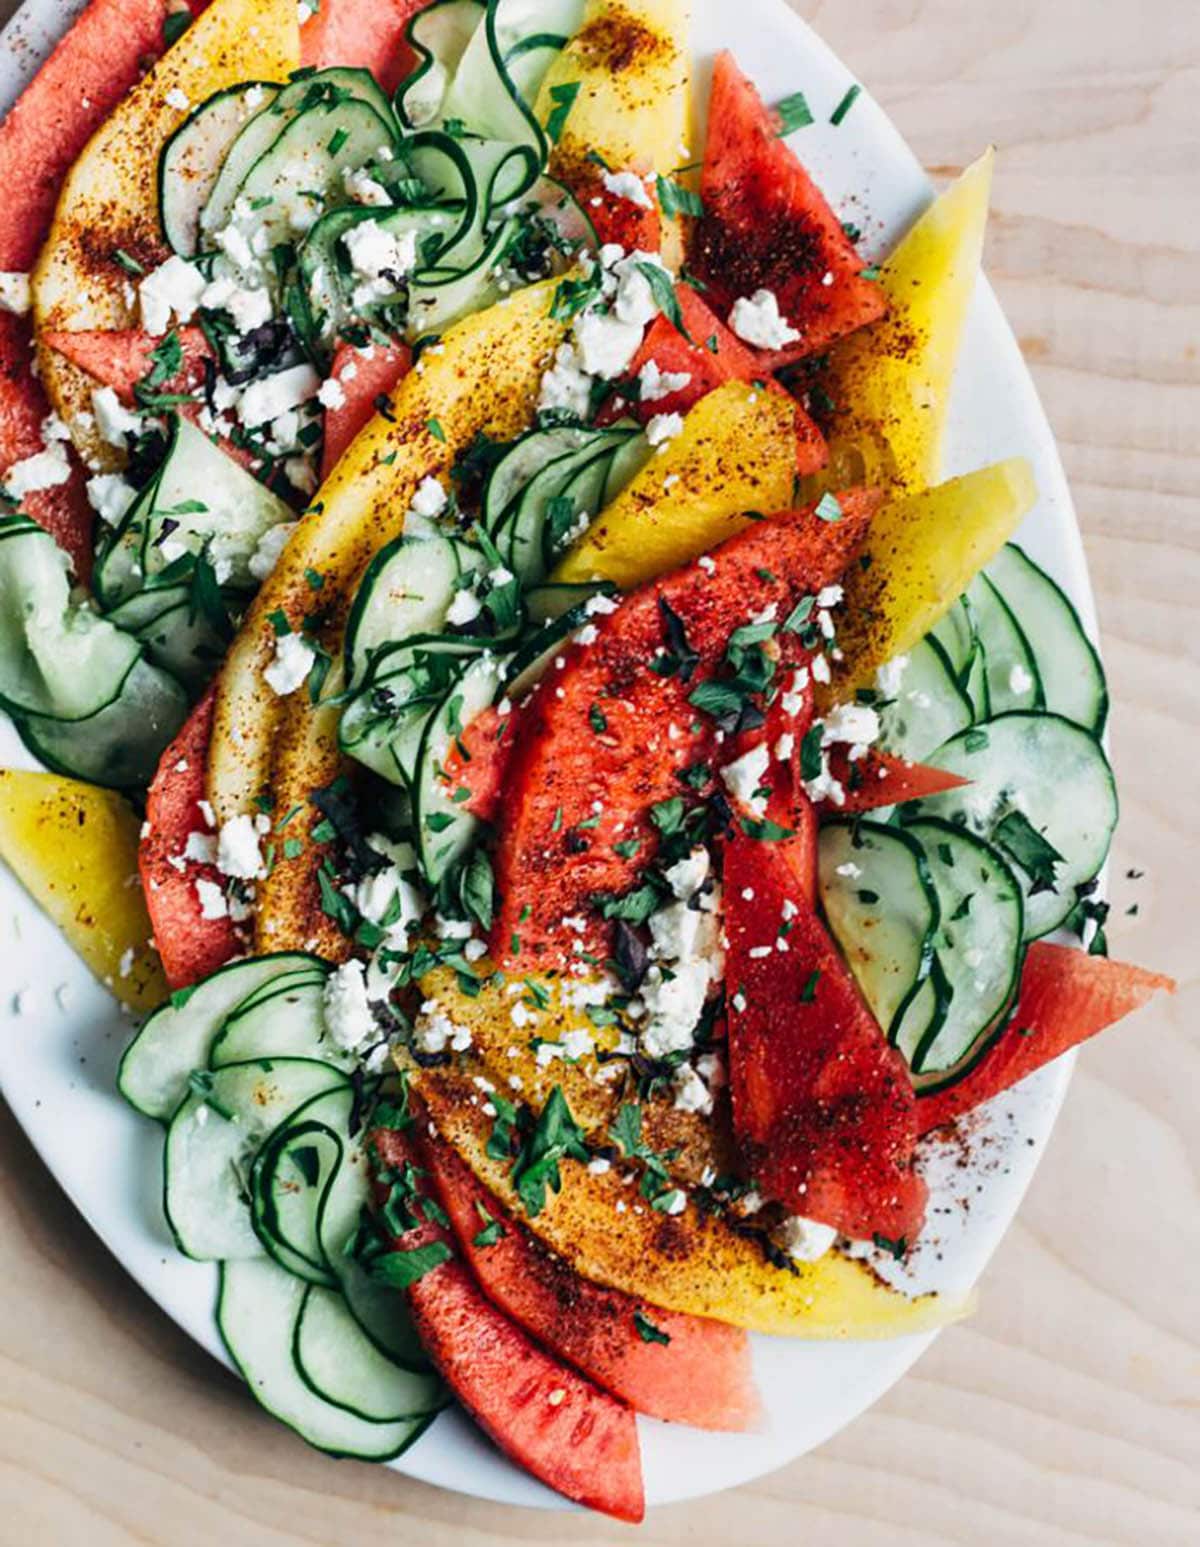 Cucumber-Watermelon Salad with Chipotle and Sumac